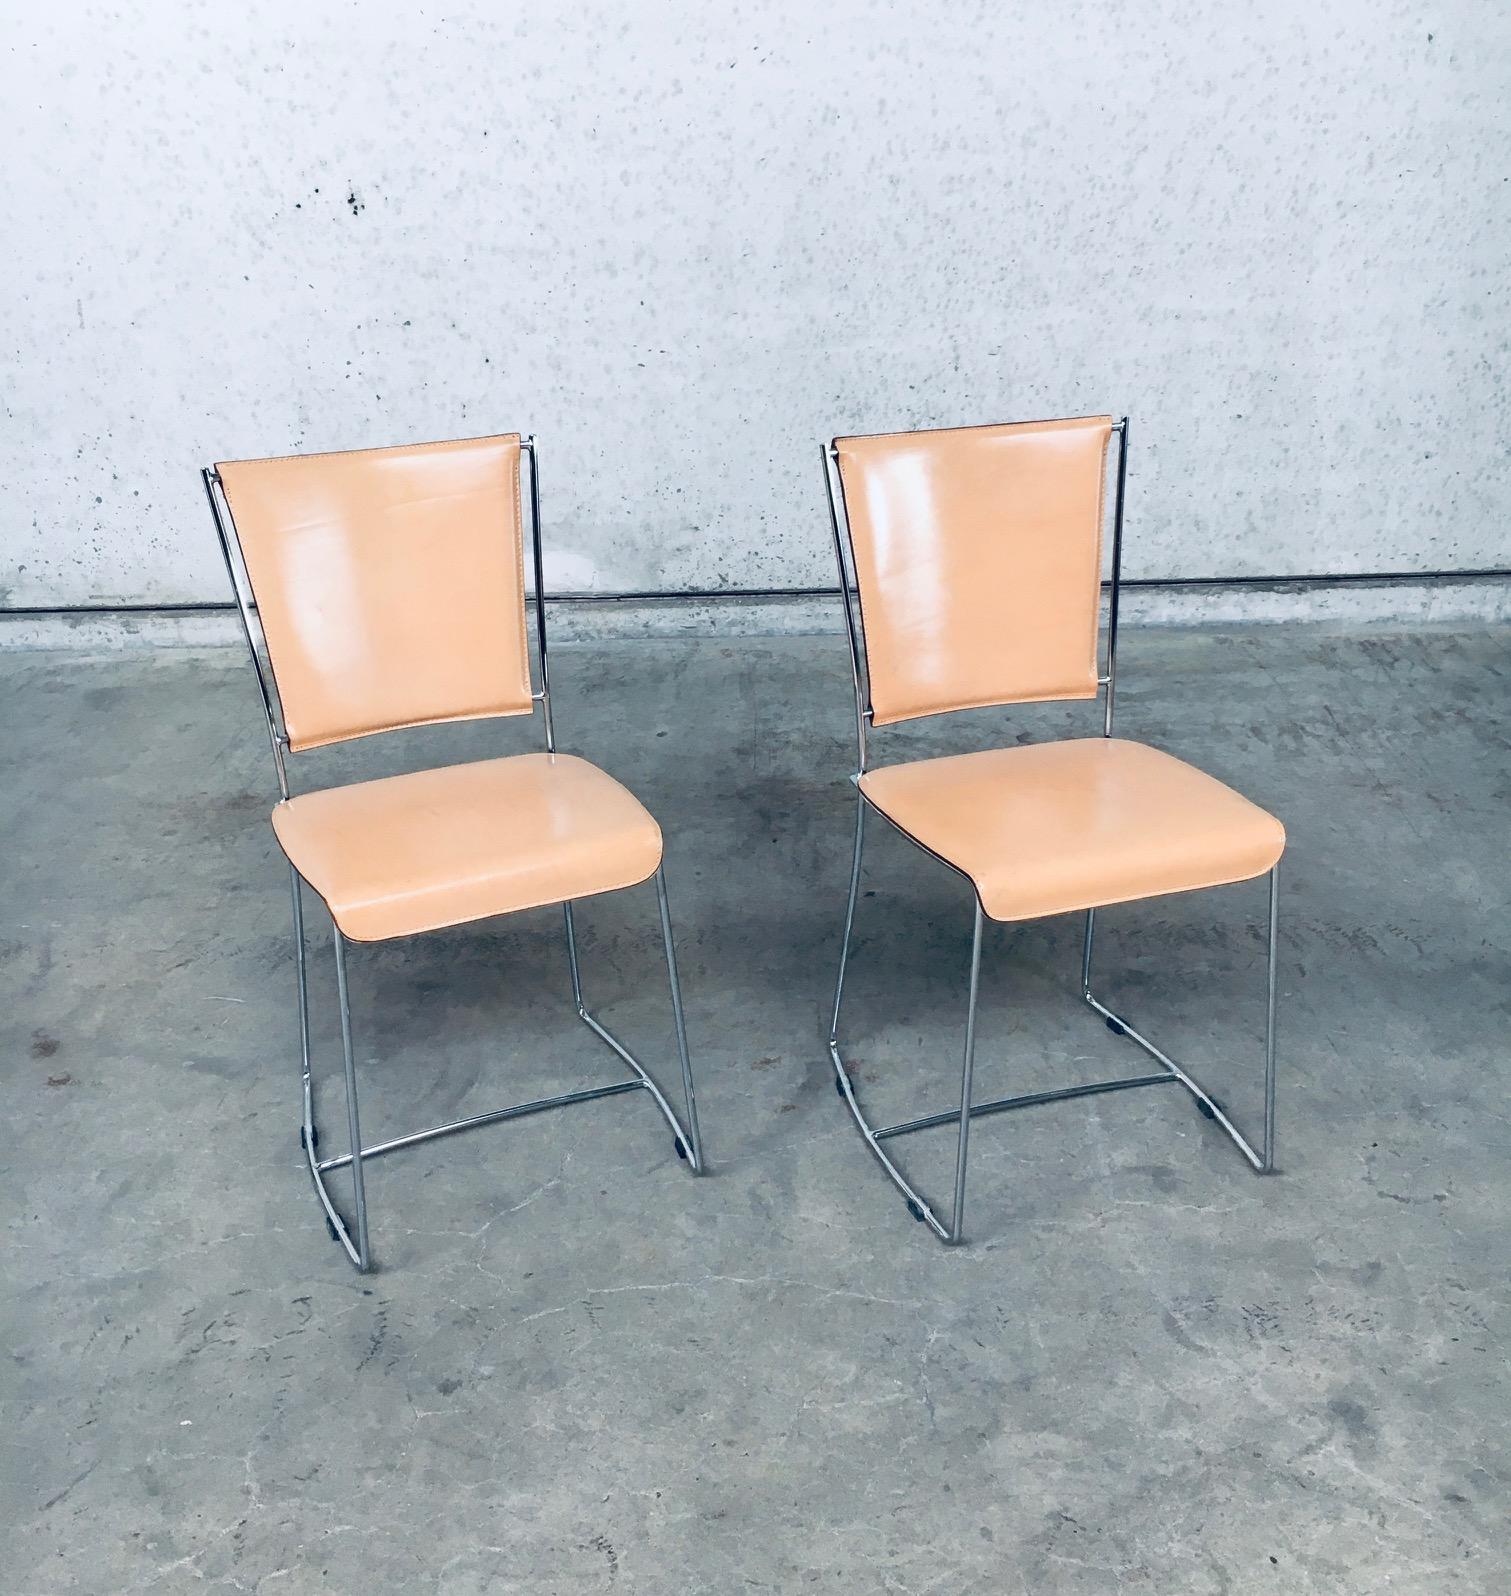 Vintage Postmodern Modern Italian Design Leather Dining Chair set by Segis, made in Italy 1990's. Beautiful slender designed chairs. Marked with label, Segis. Beige thick sown leather with chrome metal frame. In very good, original condition. Each